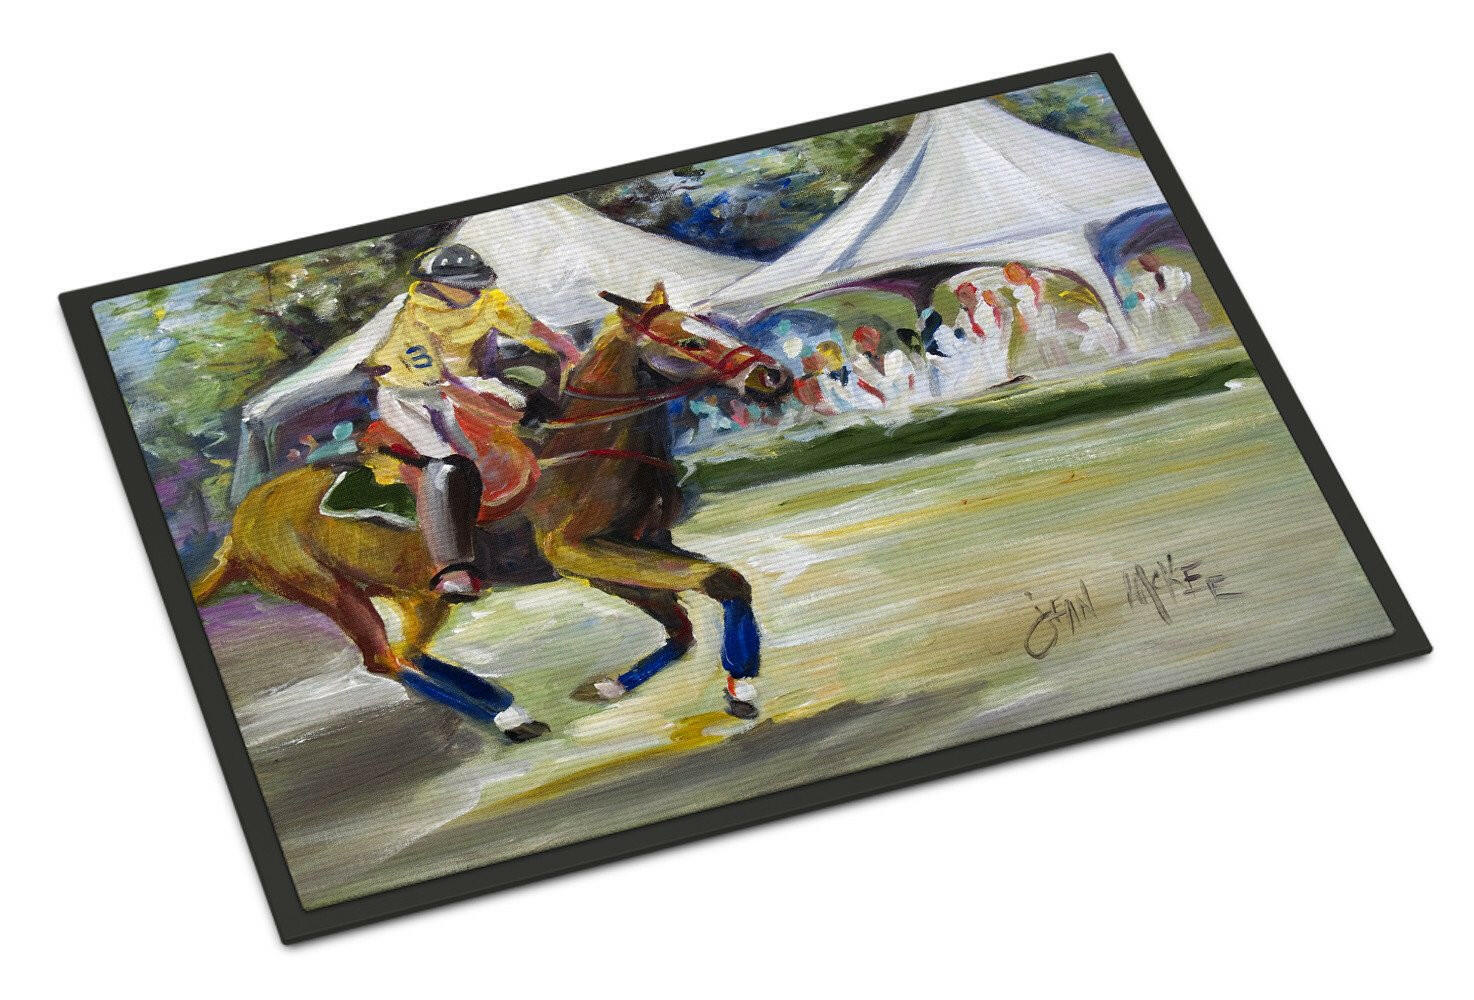 Polo at the Point Indoor or Outdoor Mat 24x36 JMK1008JMAT - the-store.com